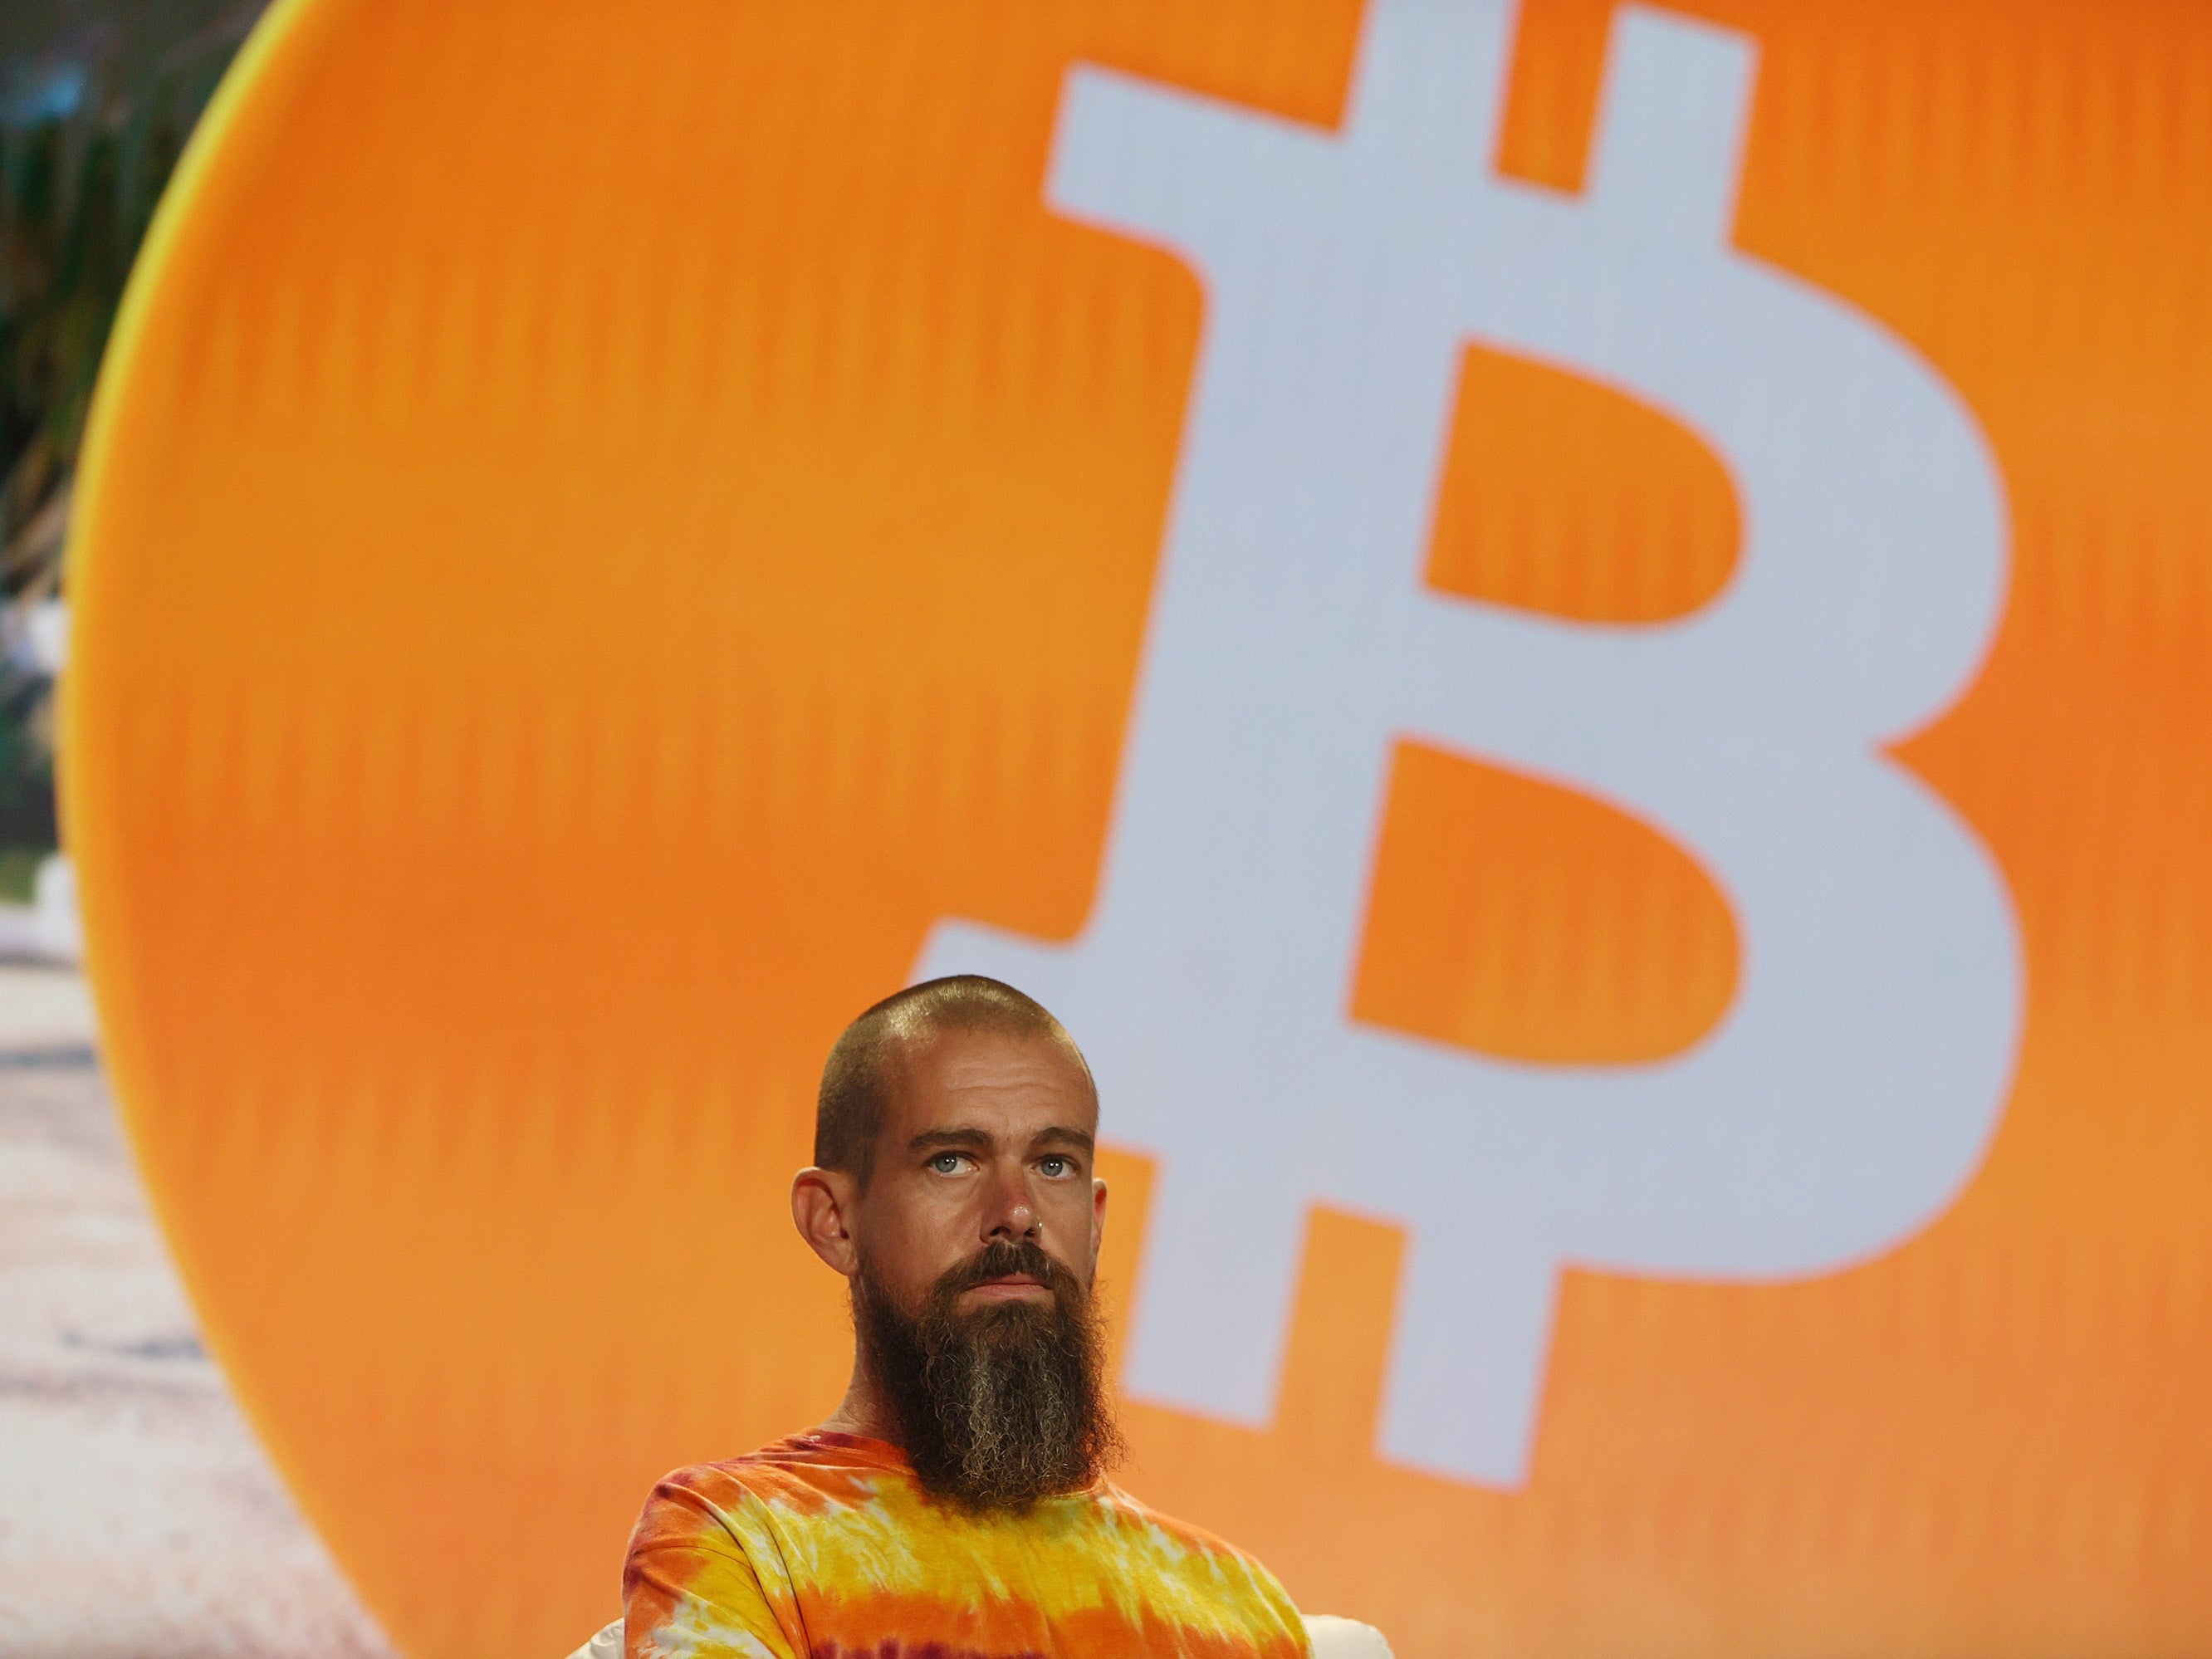 Jack Dorsey creator, co-founder, and Chairman of Twitter and co-founder & CEO of Square speaks on stage at the Bitcoin 2021 Convention, a crypto-currency conference held at the Mana Convention Center in Wynwood on 4 June, 2021 in Miami, Florida